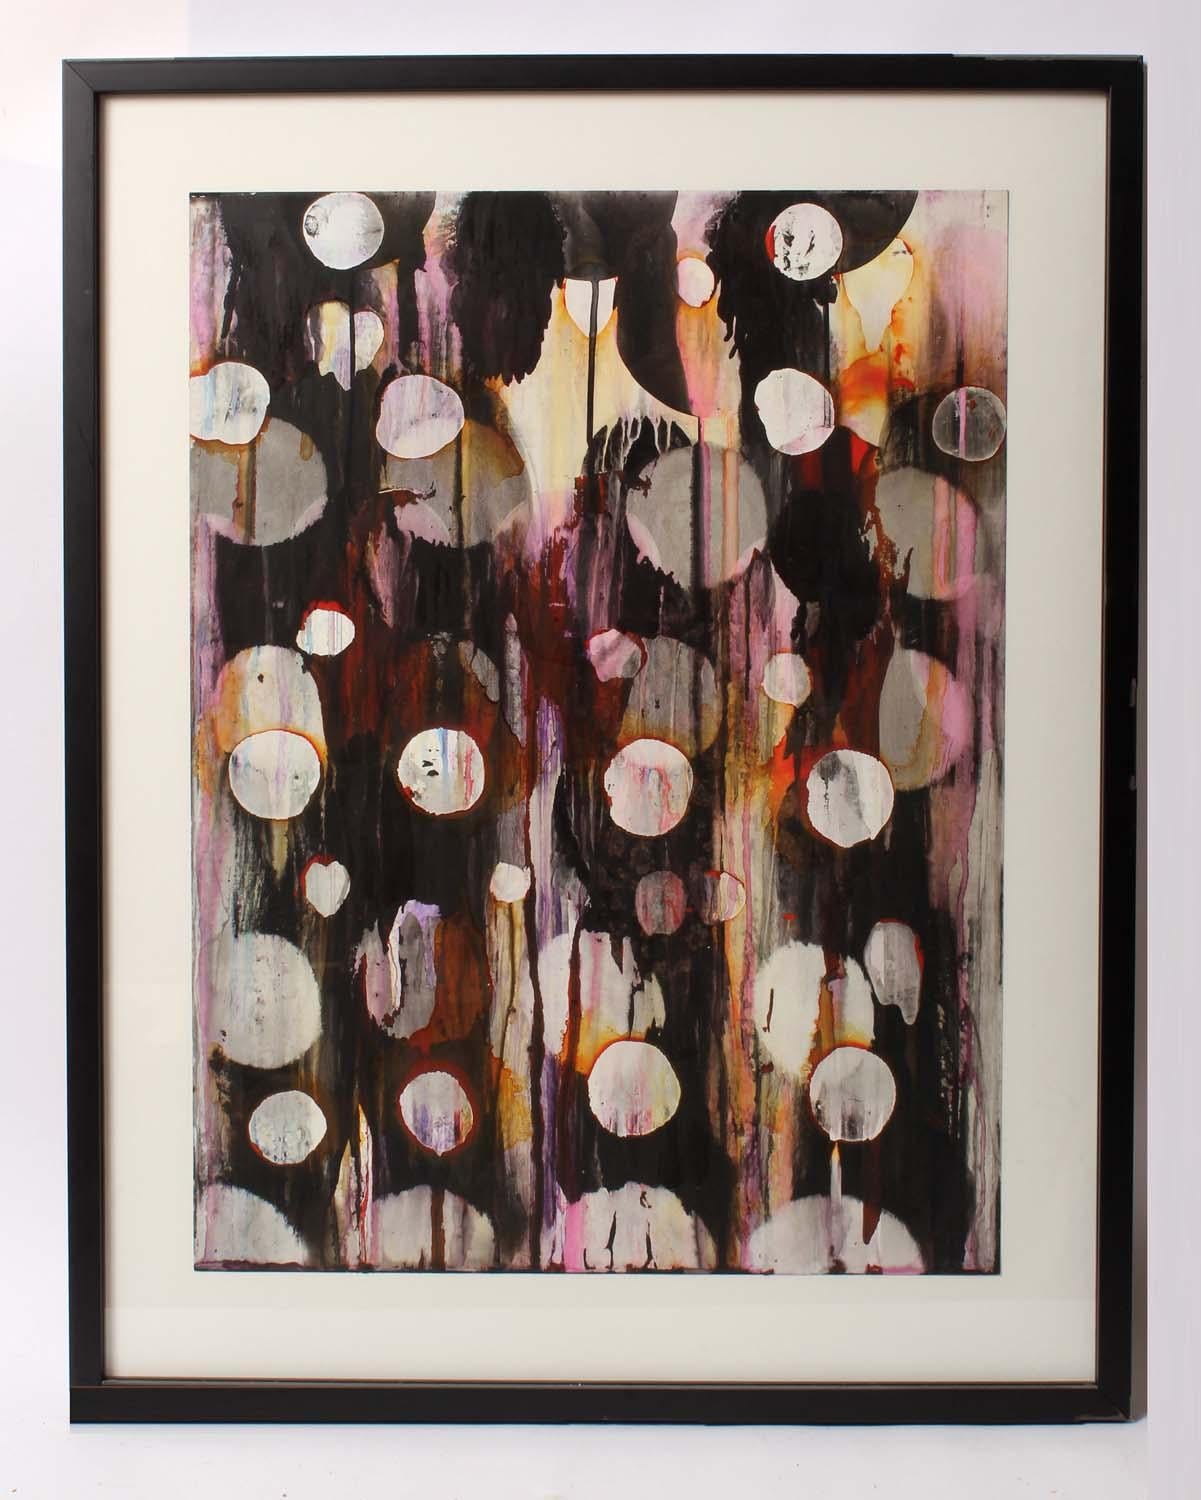 A mixed media on paper by American female contemporary artist Ani Hoover.  This beautiful mixed media painting featured the artist signature circular focus with layers and layers of acrylic and spray in Red, Pink, Orange, Yellow and Black.

This